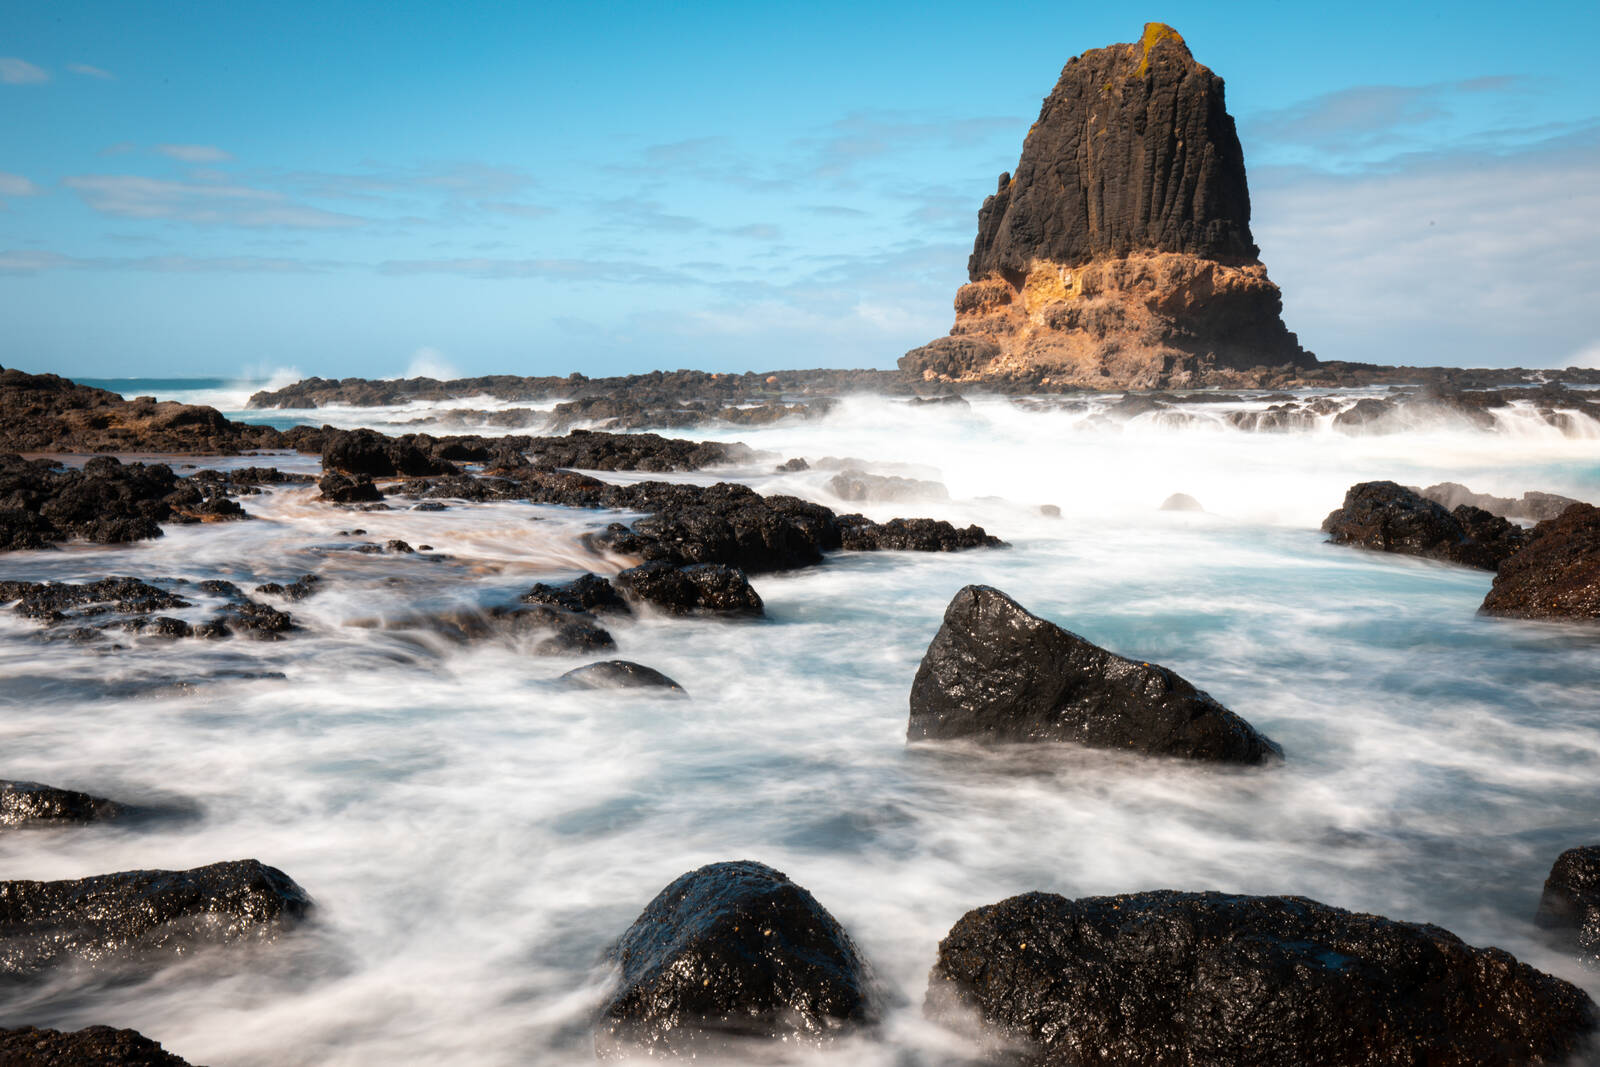 Image of Pulpit Rock by Thom Newman